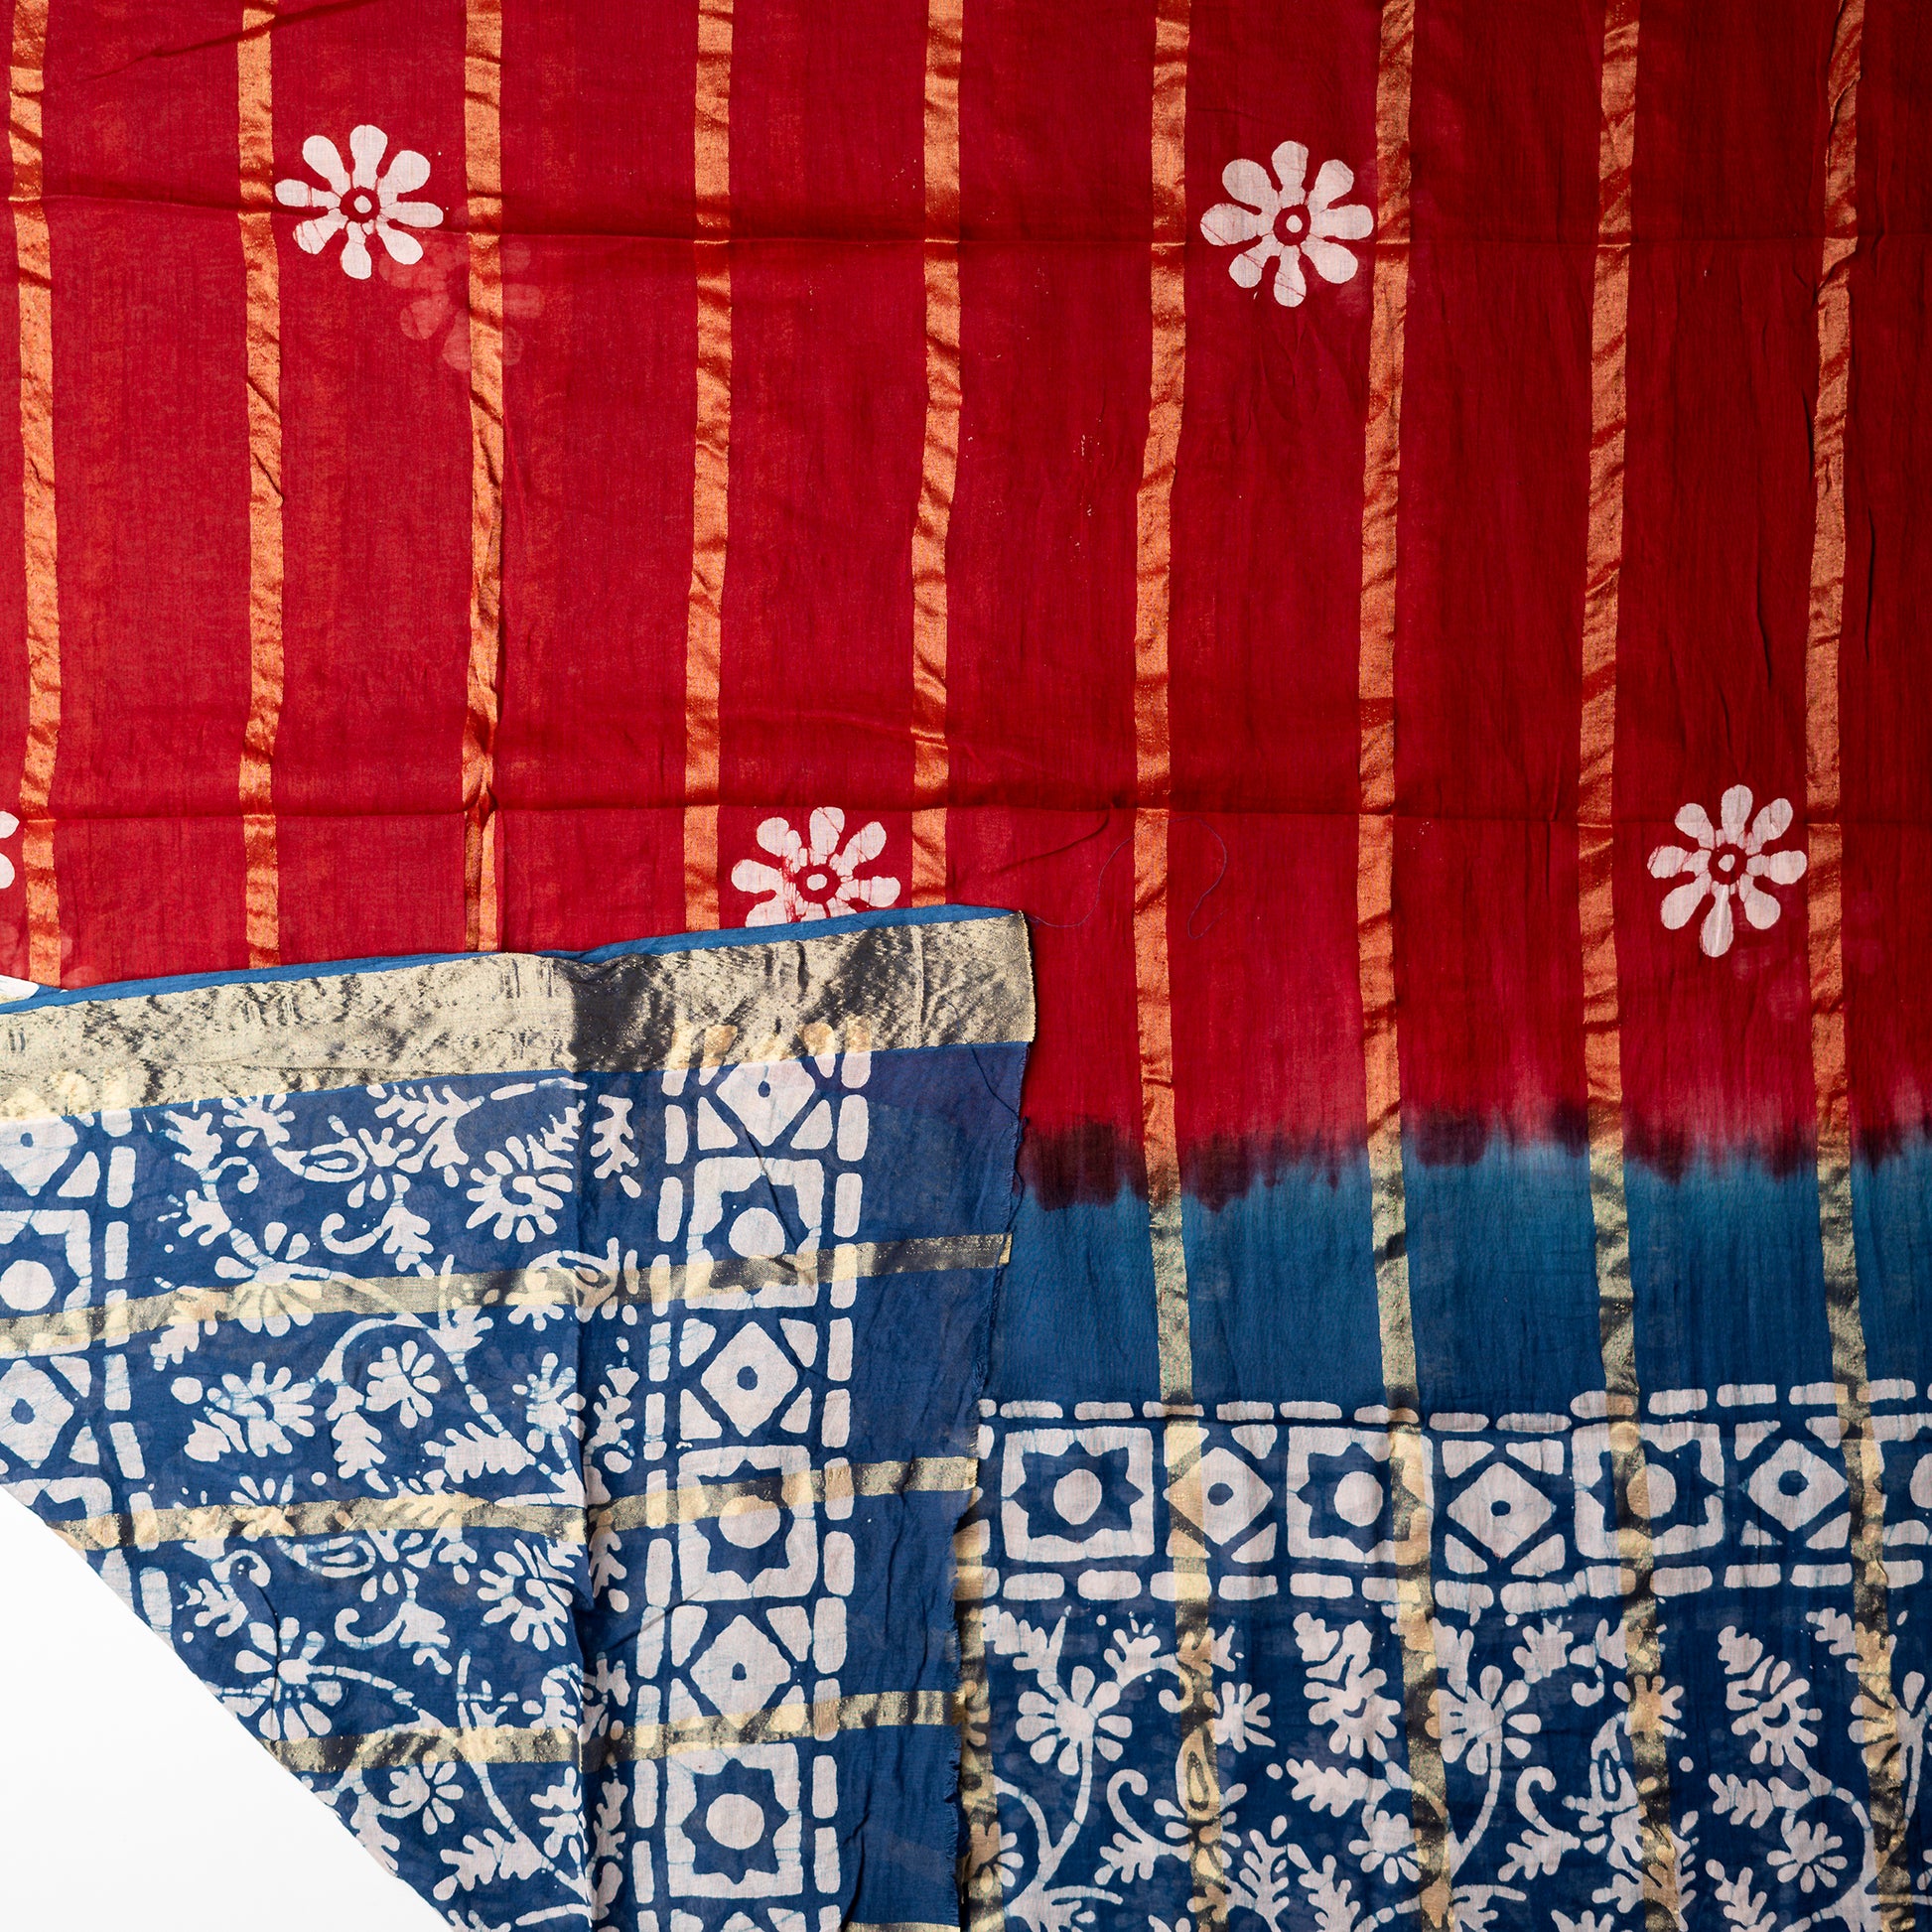 Red and blue color cotton dupatta with golden color lines in between and also wax batik prints